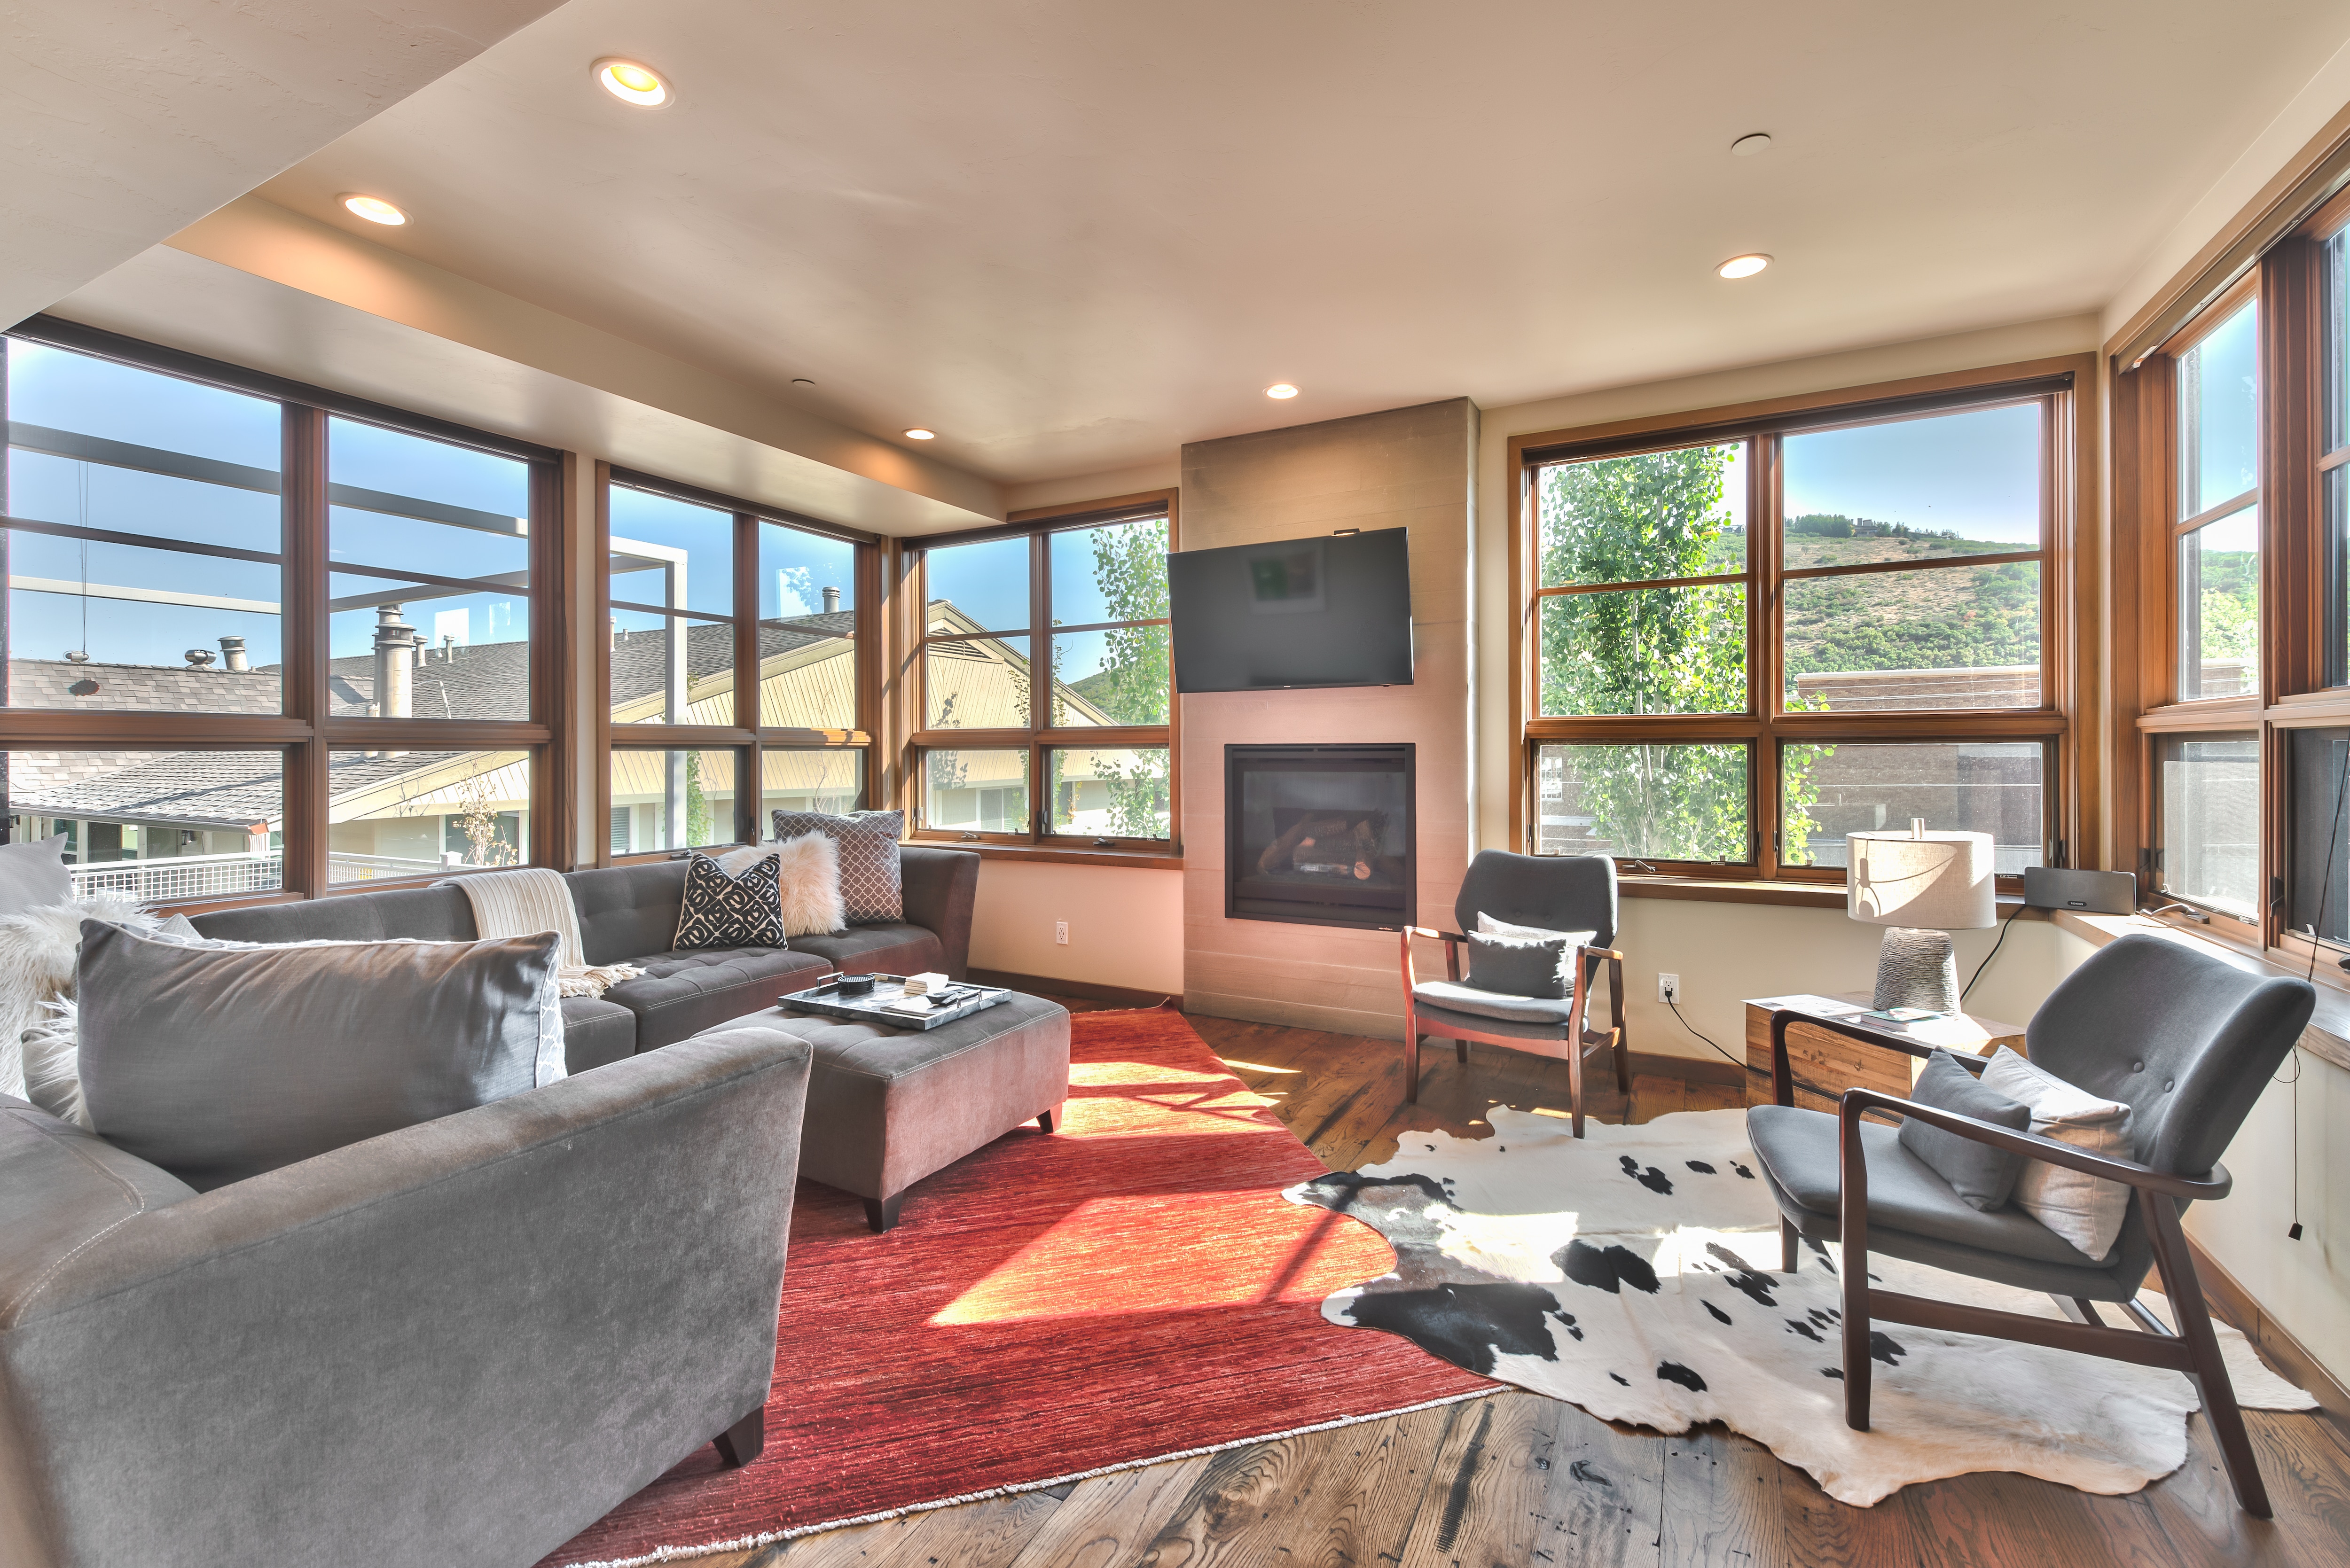 Level 2 - Living Room with Comfortable Contemporary Furnishings, Gas Fireplace, TV, Beautiful Hardwood Floors and Mountain Views